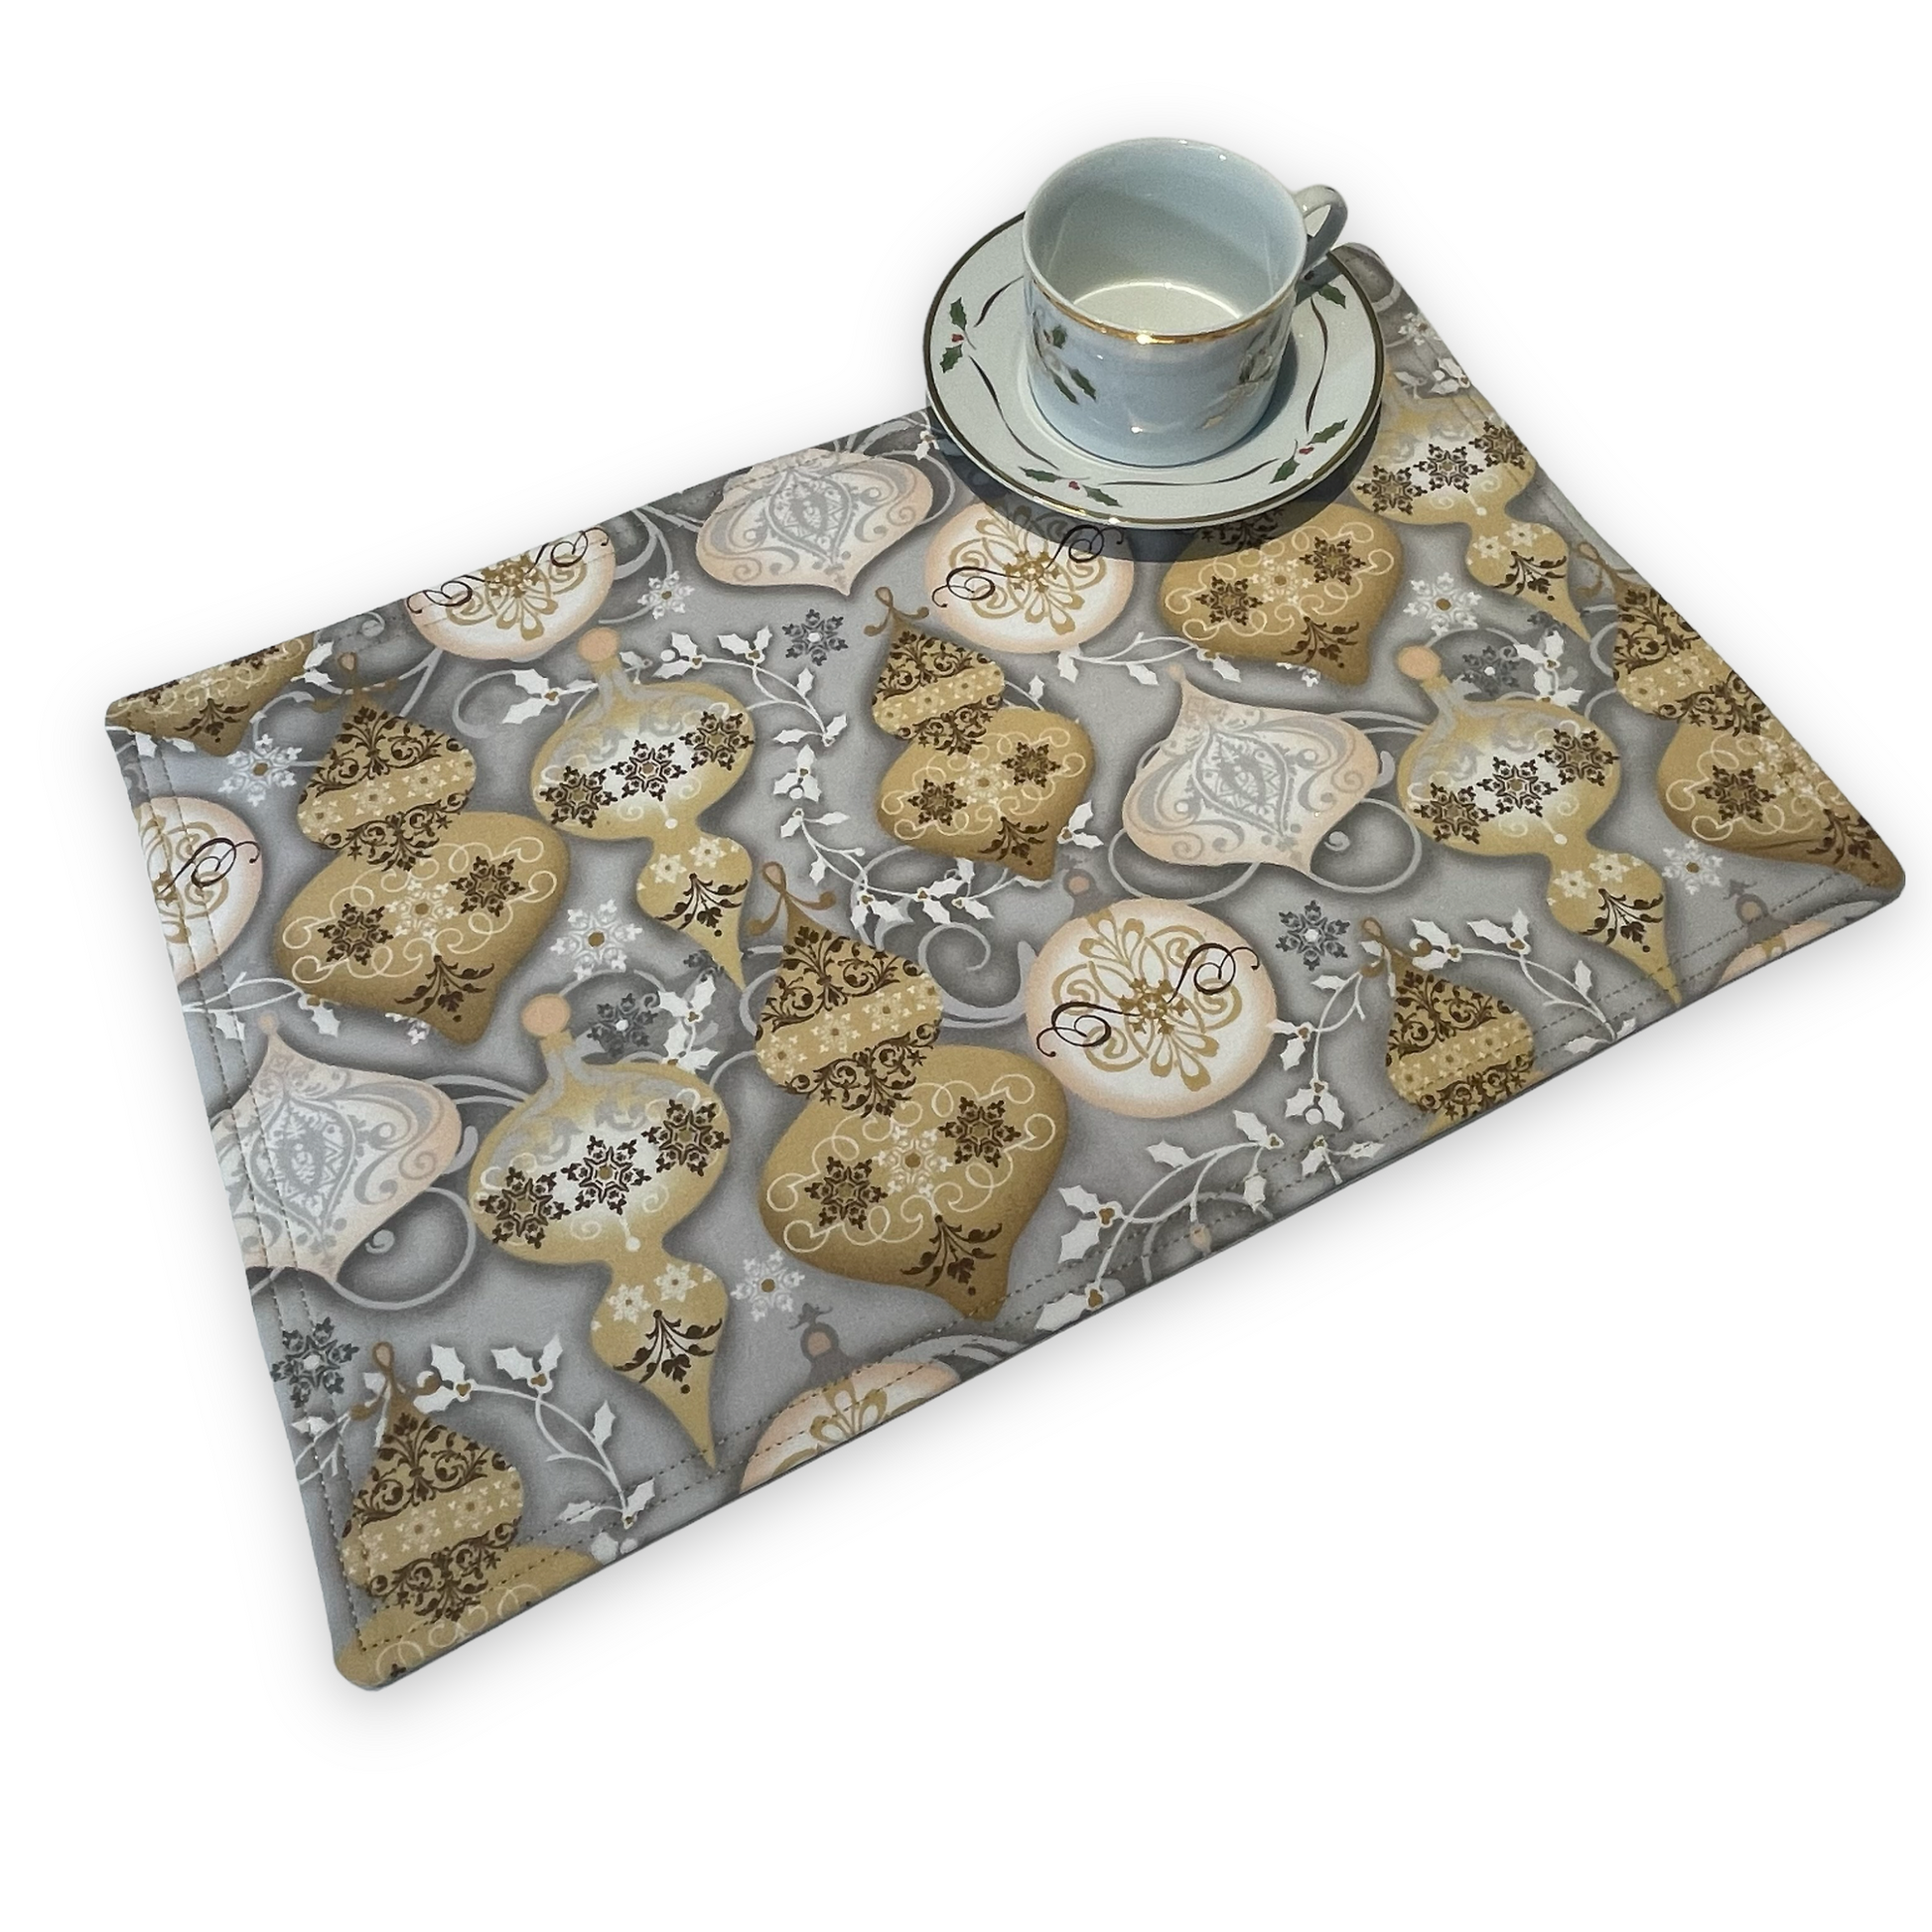 Set of two Christmas Placemats, handmade in Canada Featuring Gold and Cream Christmas Ornaments on one side and Silver Snowflakes on the reverse. Easily dress up your Christmas Kitchen Table with these stylish luxury placemats. Check out all the mix and match decor at Home Stitchery Decor